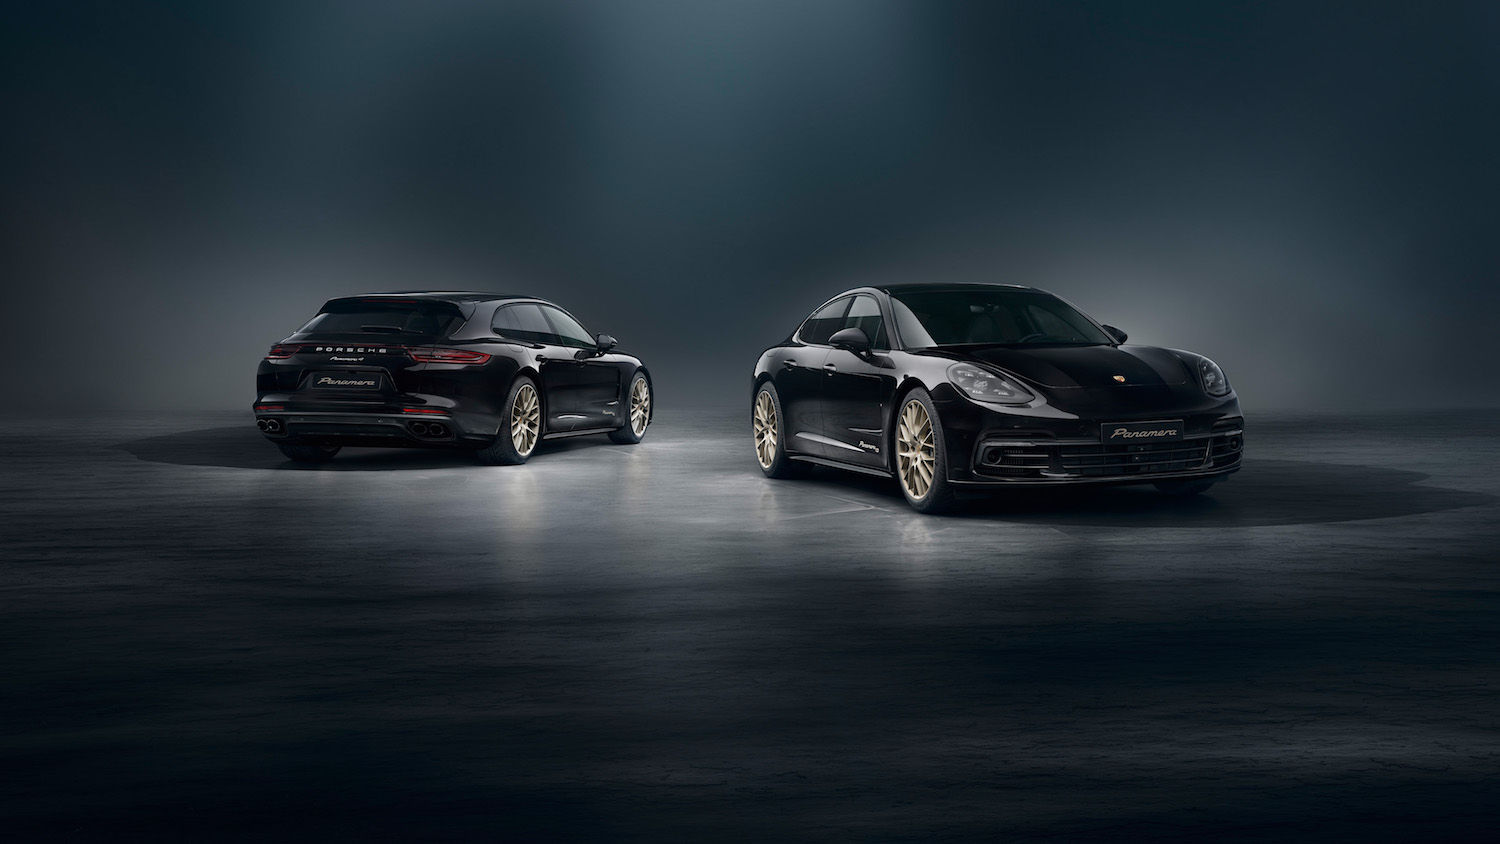 Porsche celebrates 10 years of the Panamera with gold-accented new editions